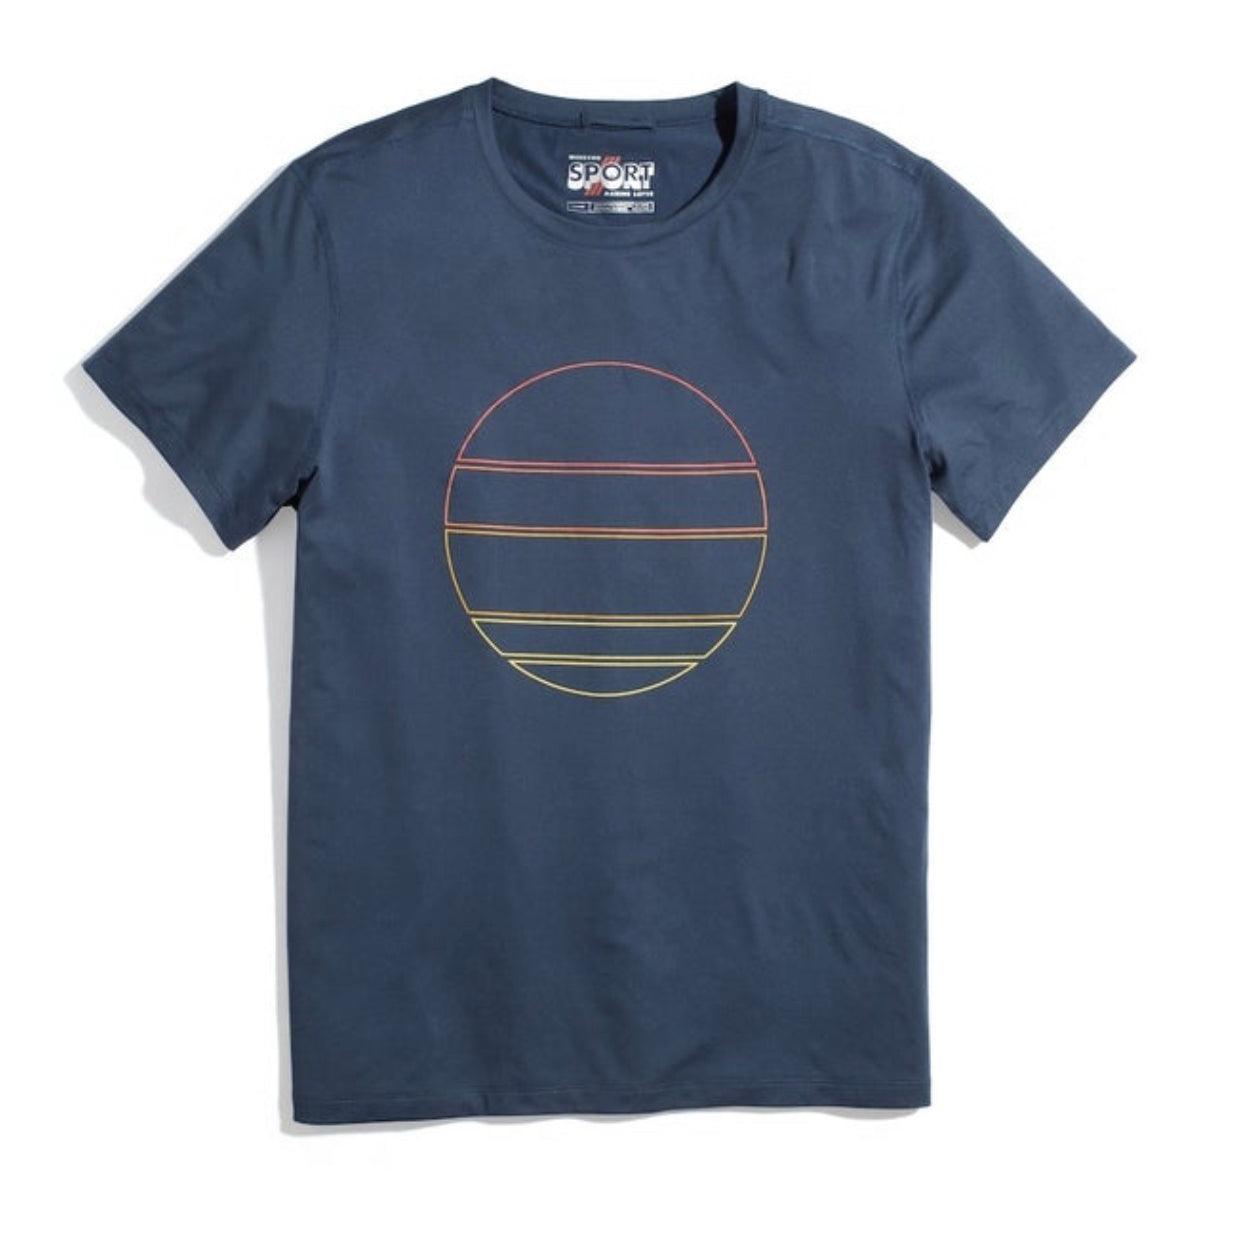 Sport Crew Graphic Tee with sun graphic stretchy yet breathable. It's carbon-peached on the face for softness by Marine Layer.- Tru Blue